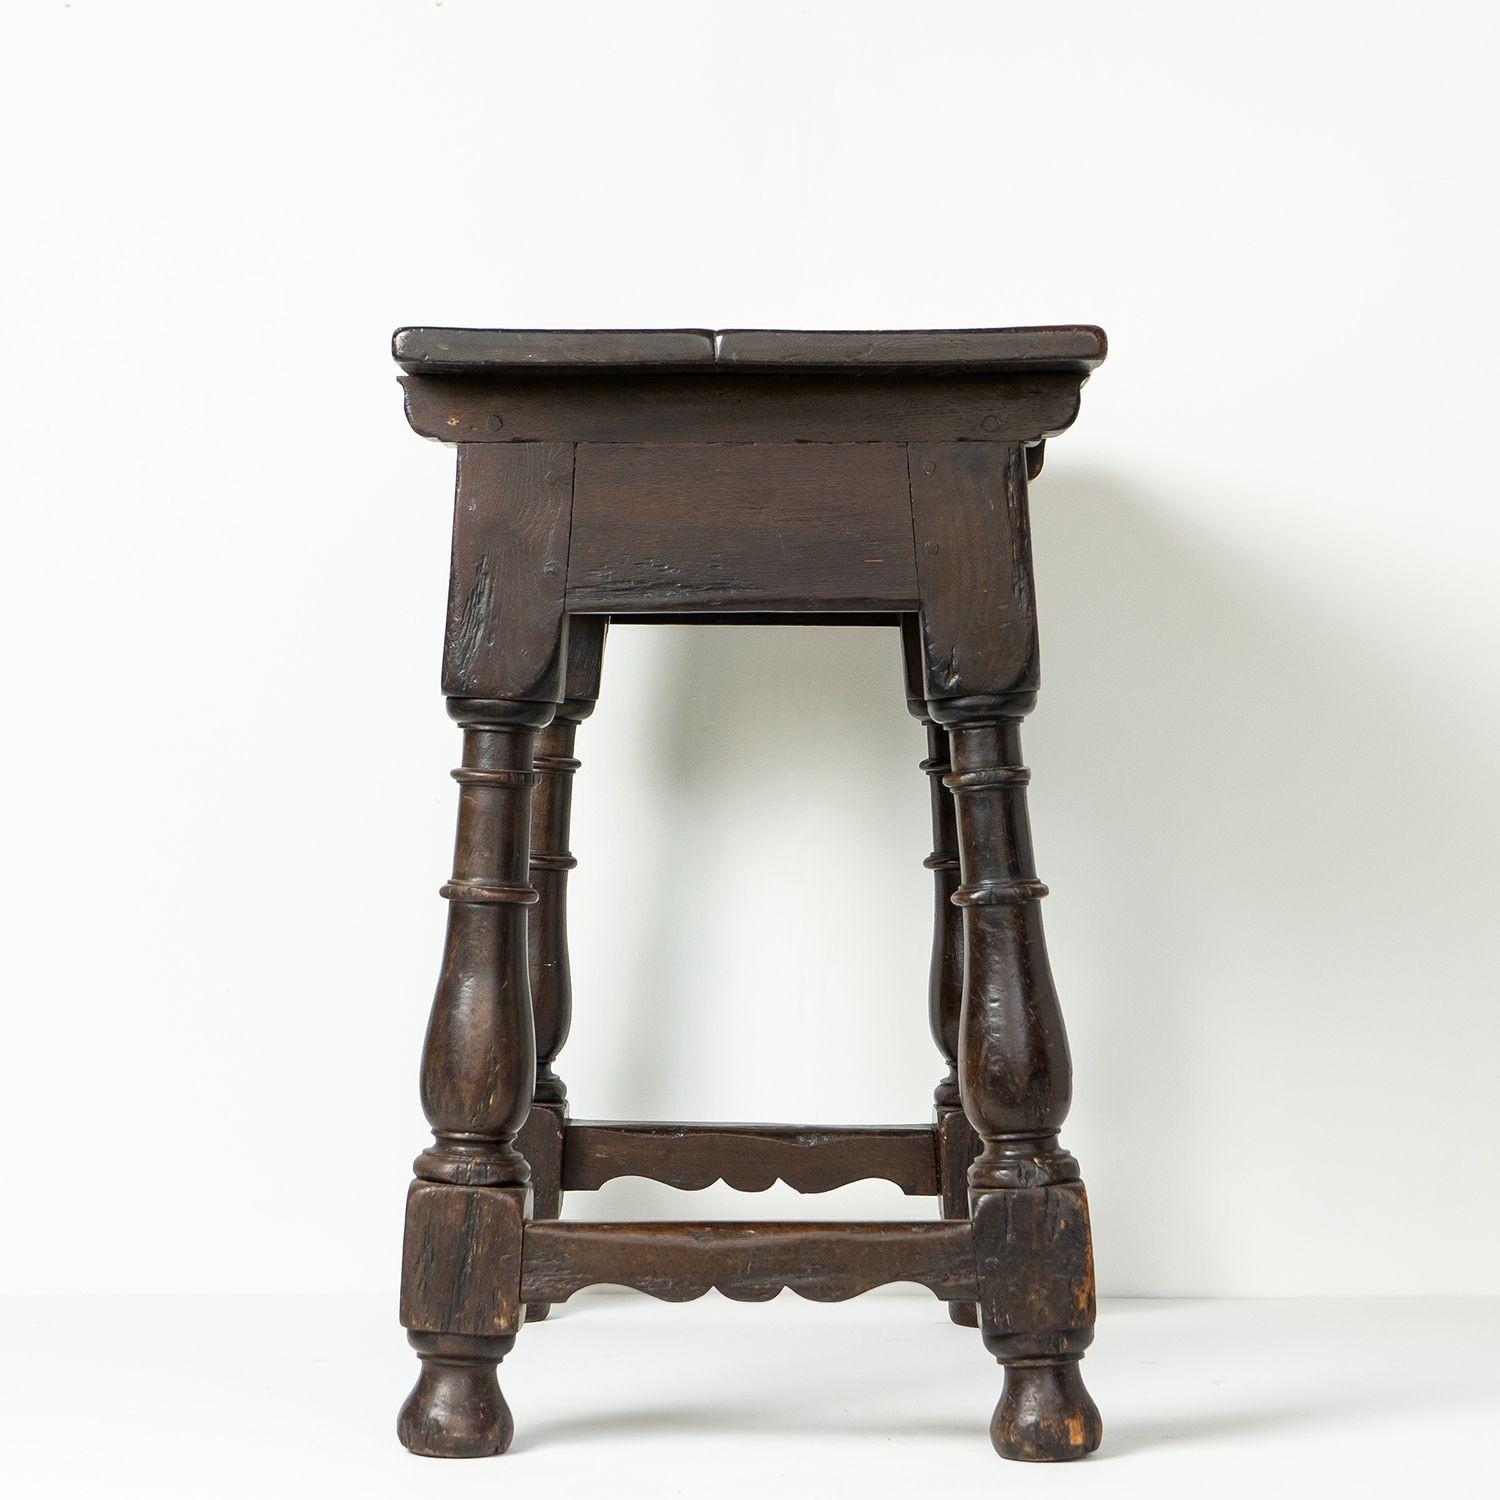 Antique Chunky Spanish Baroque Oak Side Table with Baluster Legs, 17th Century For Sale 6